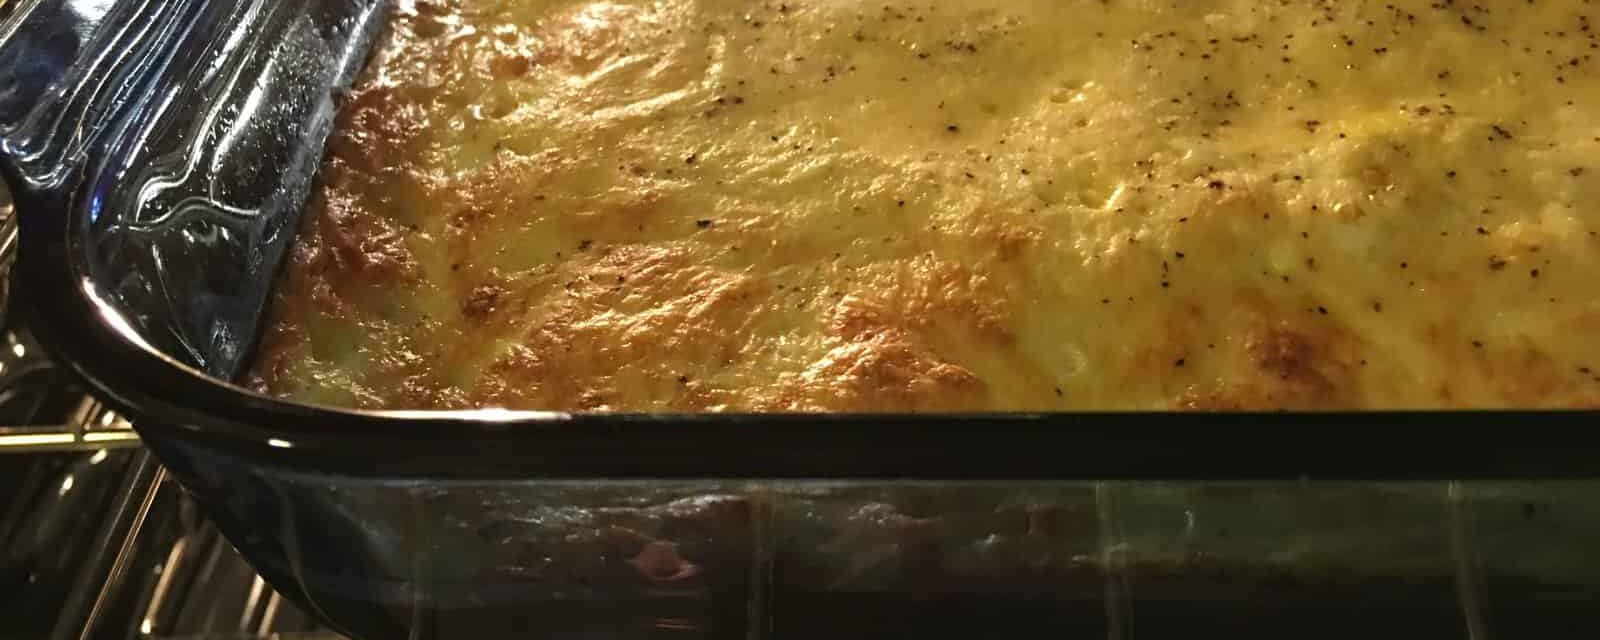 CARE Recipe: Cheesy Egg Bake with Buttered Toast and Fruit